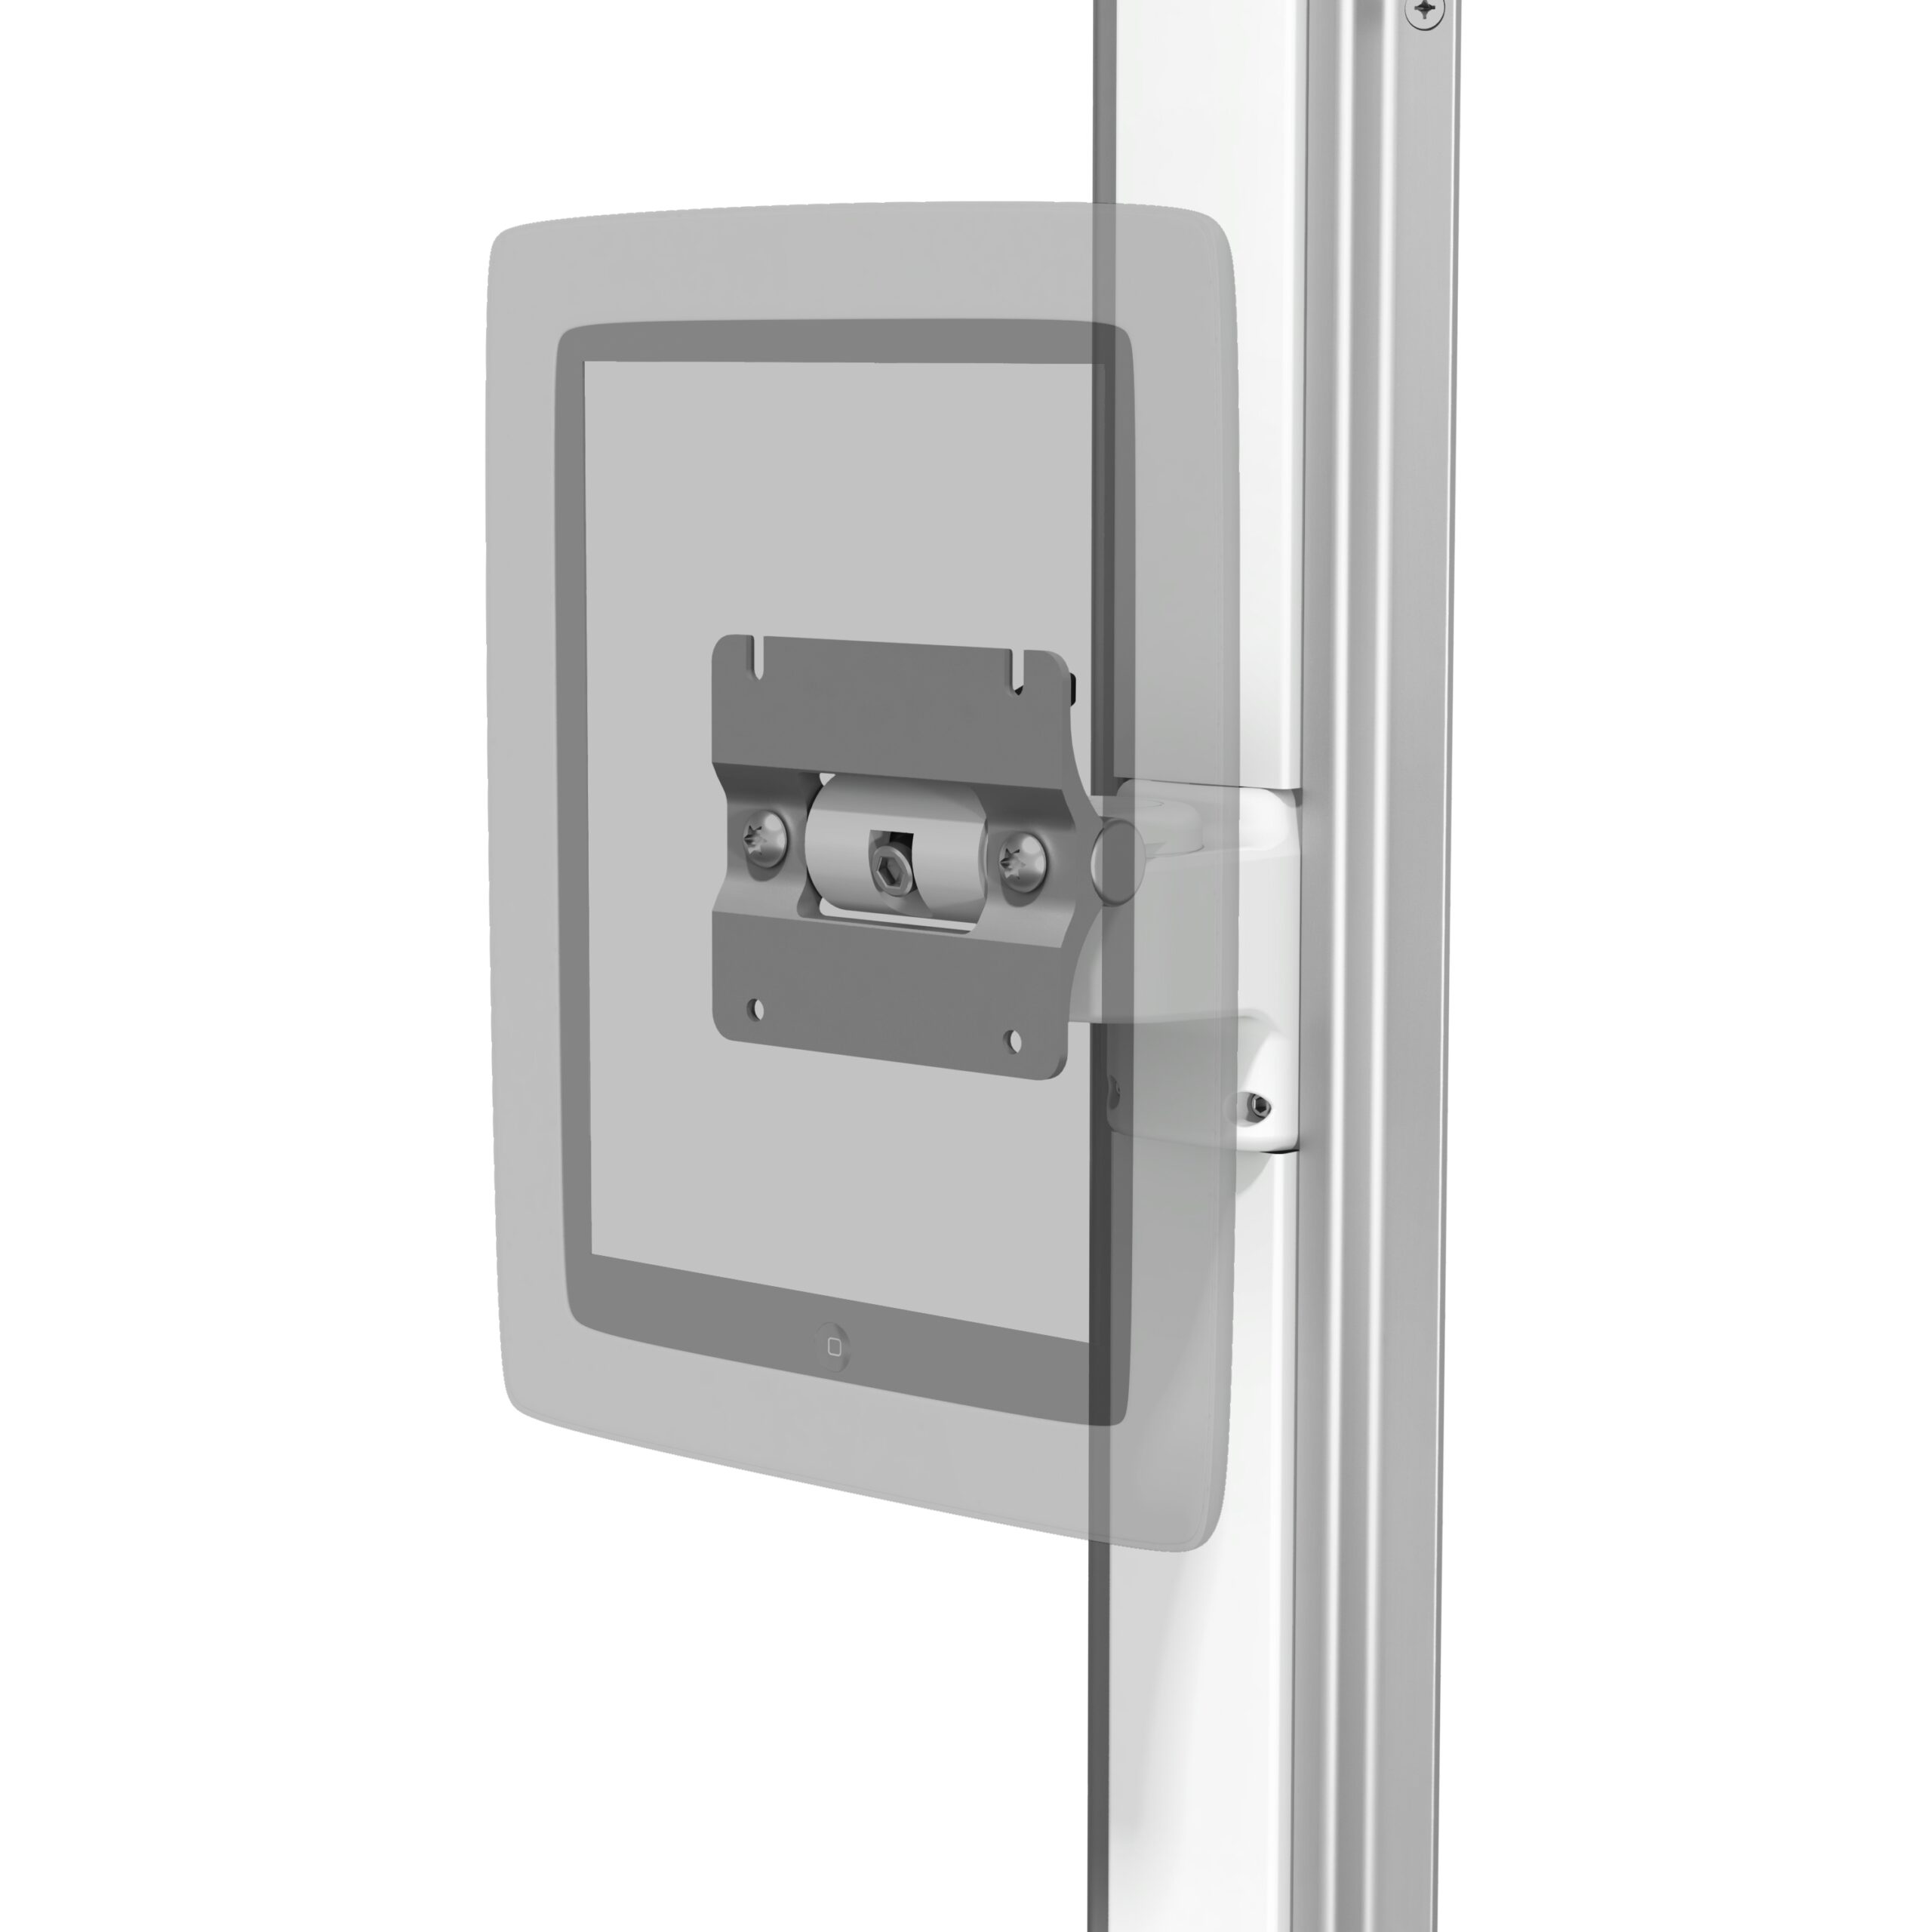 M Series Flush Mount with VESA Mounting Plate